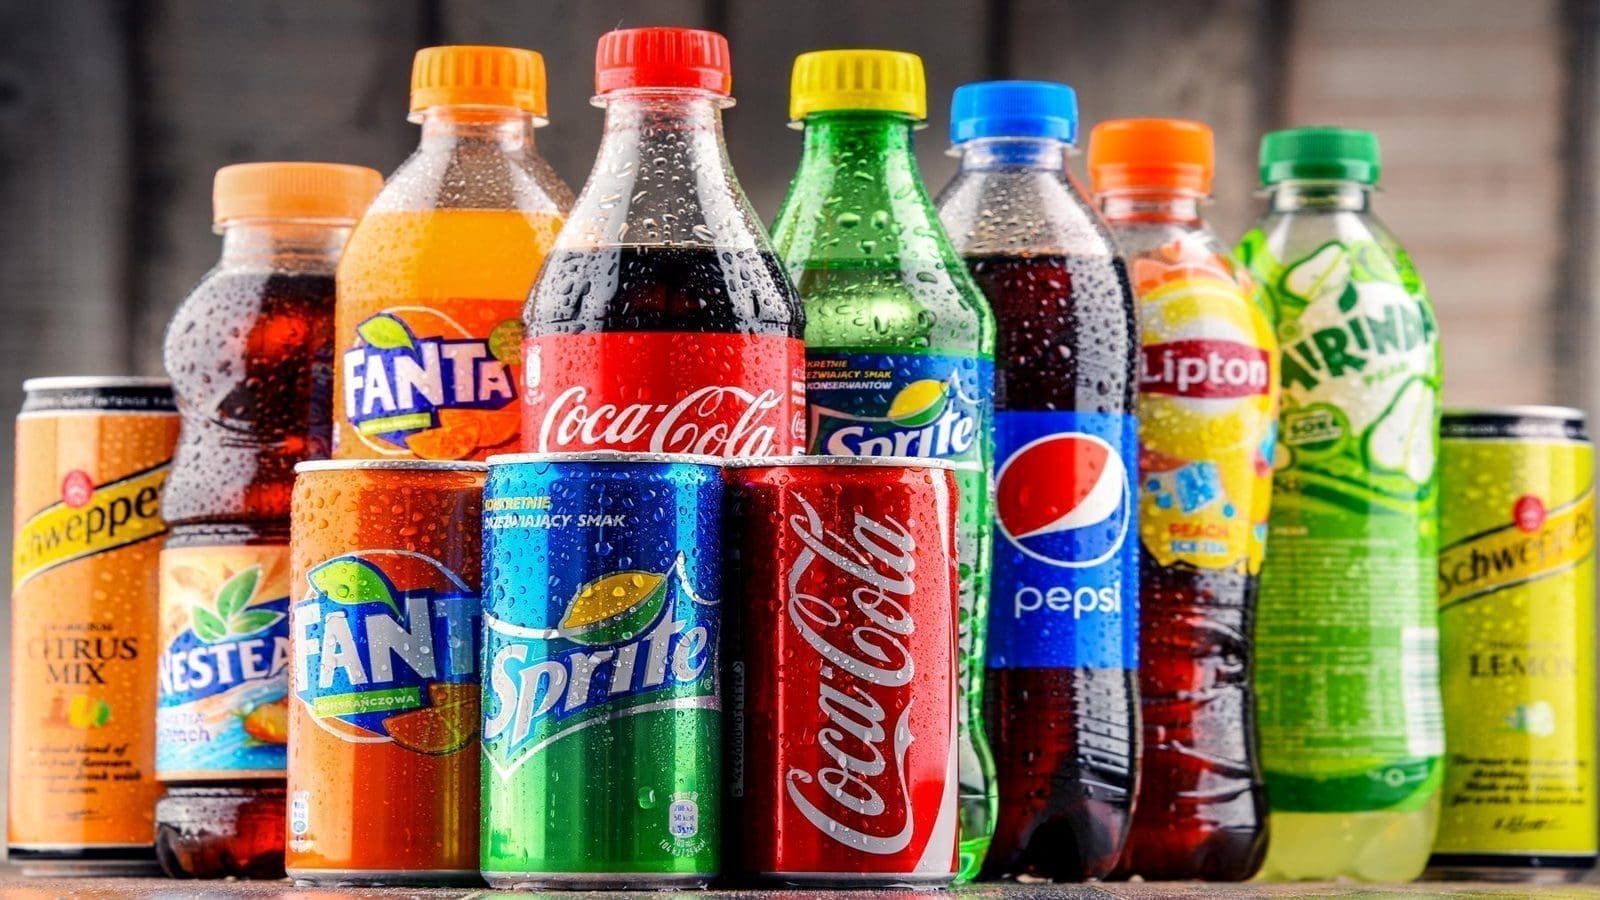 European soft drinks industry commits to reduce sugar content in beverages by 10% before end of 2025